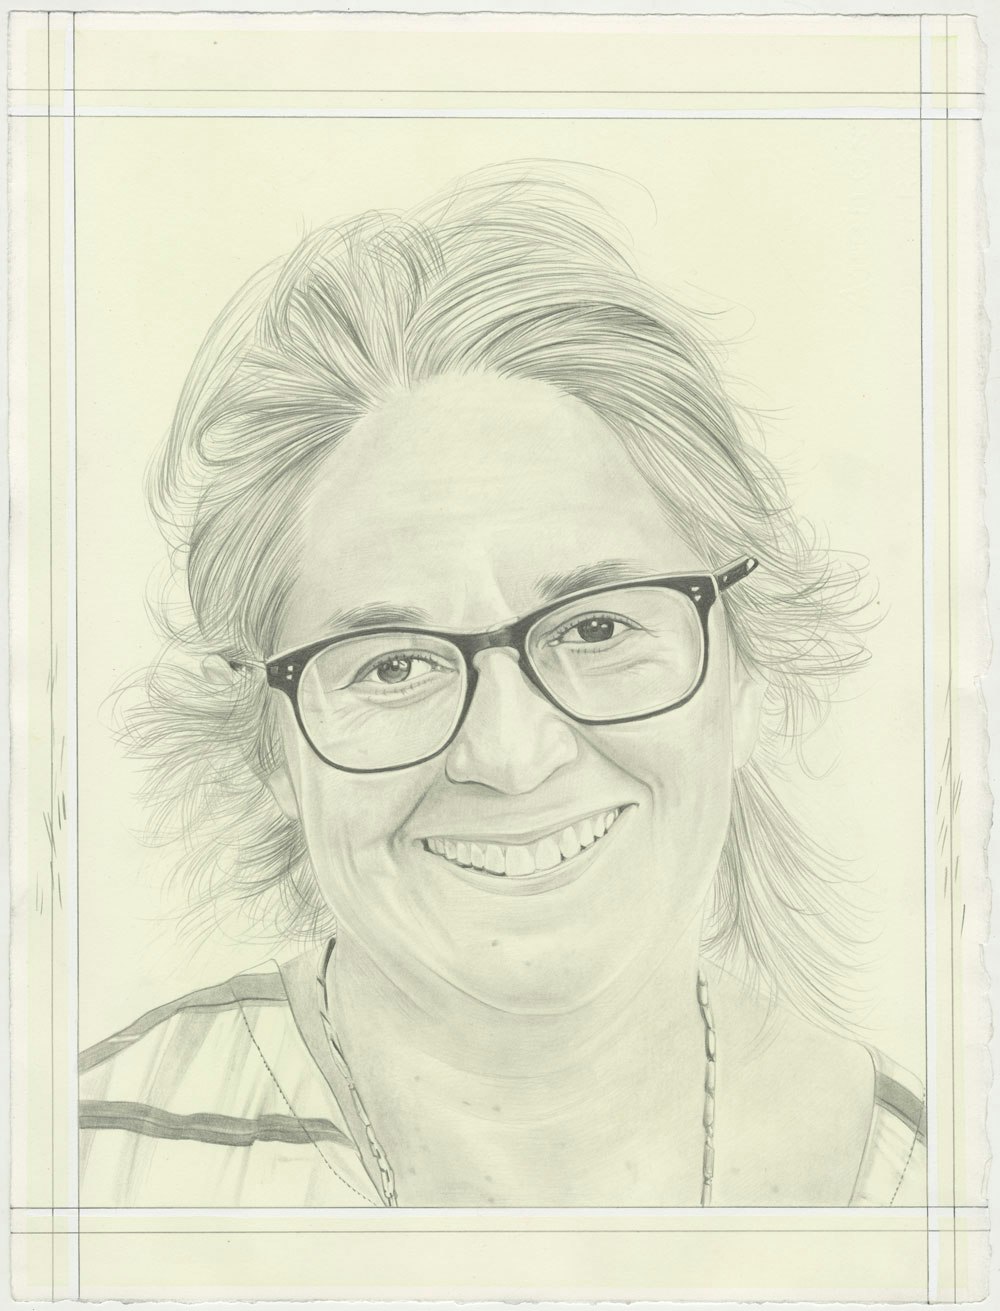 Portrait of Tacita Dean, pencil on paper by Phong H. Bui.